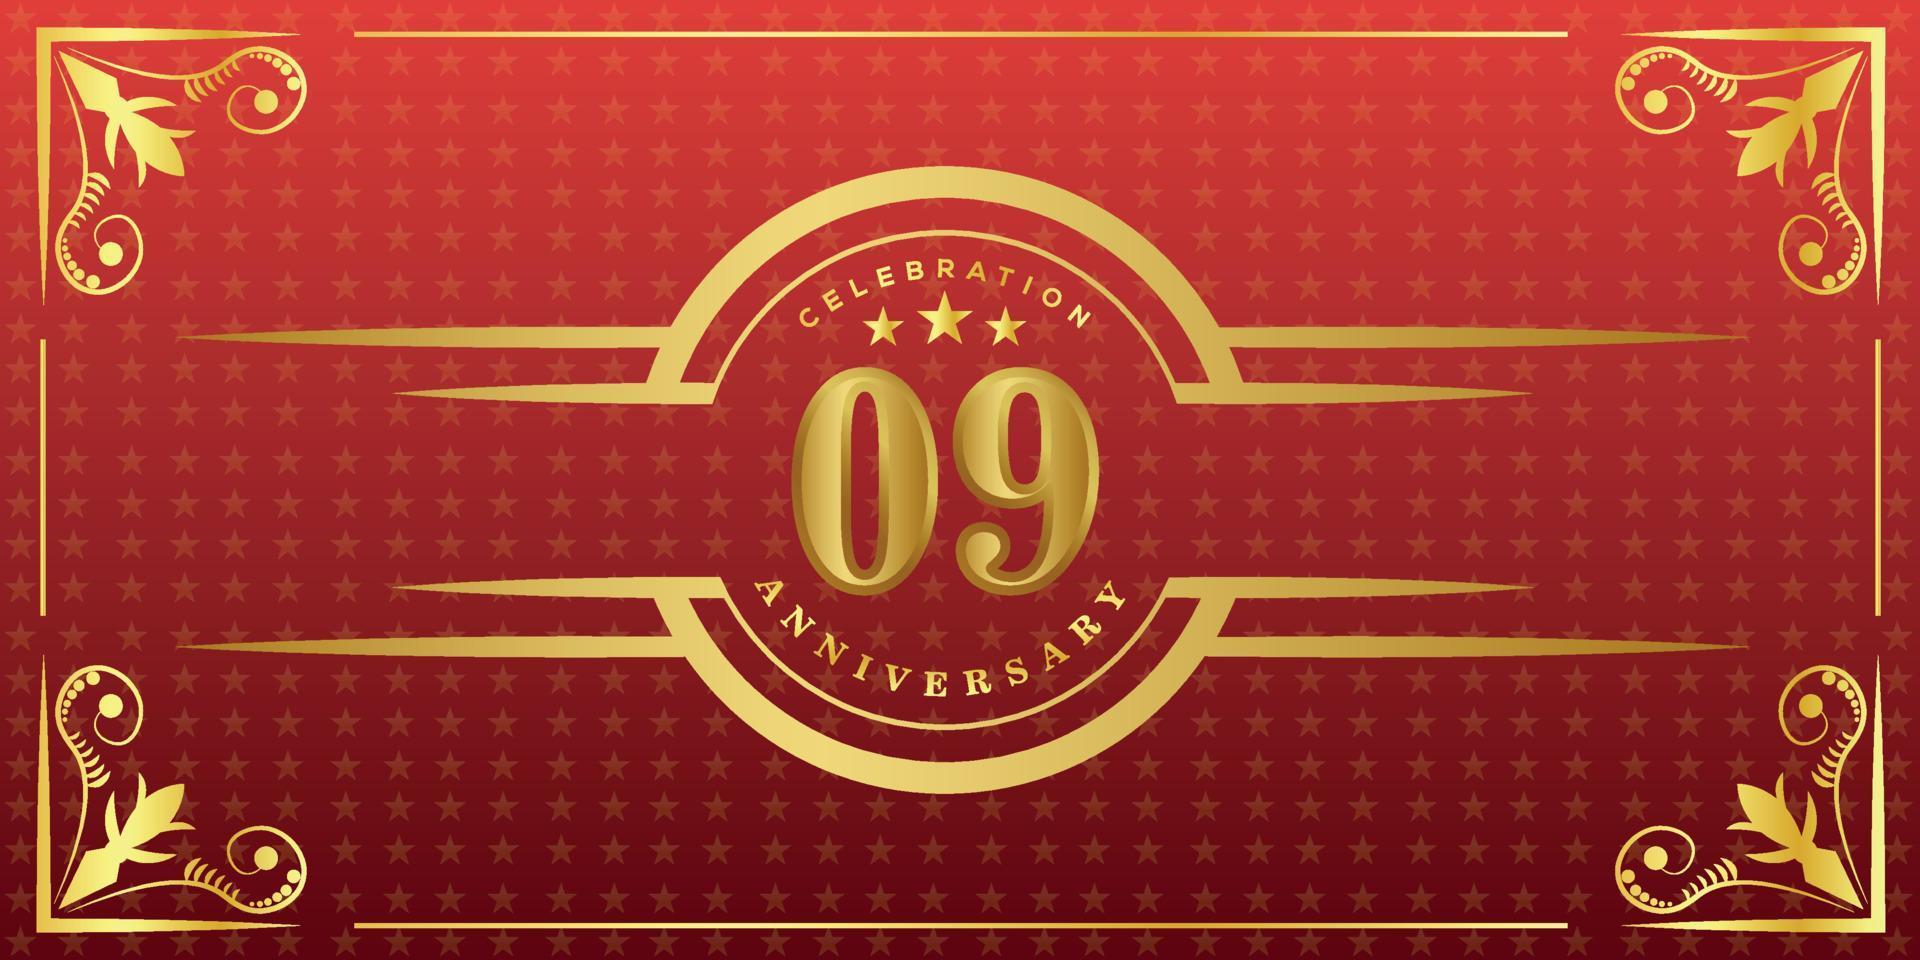 09th anniversary logo with golden ring, confetti and gold border isolated on elegant red background, sparkle, vector design for greeting card and invitation card